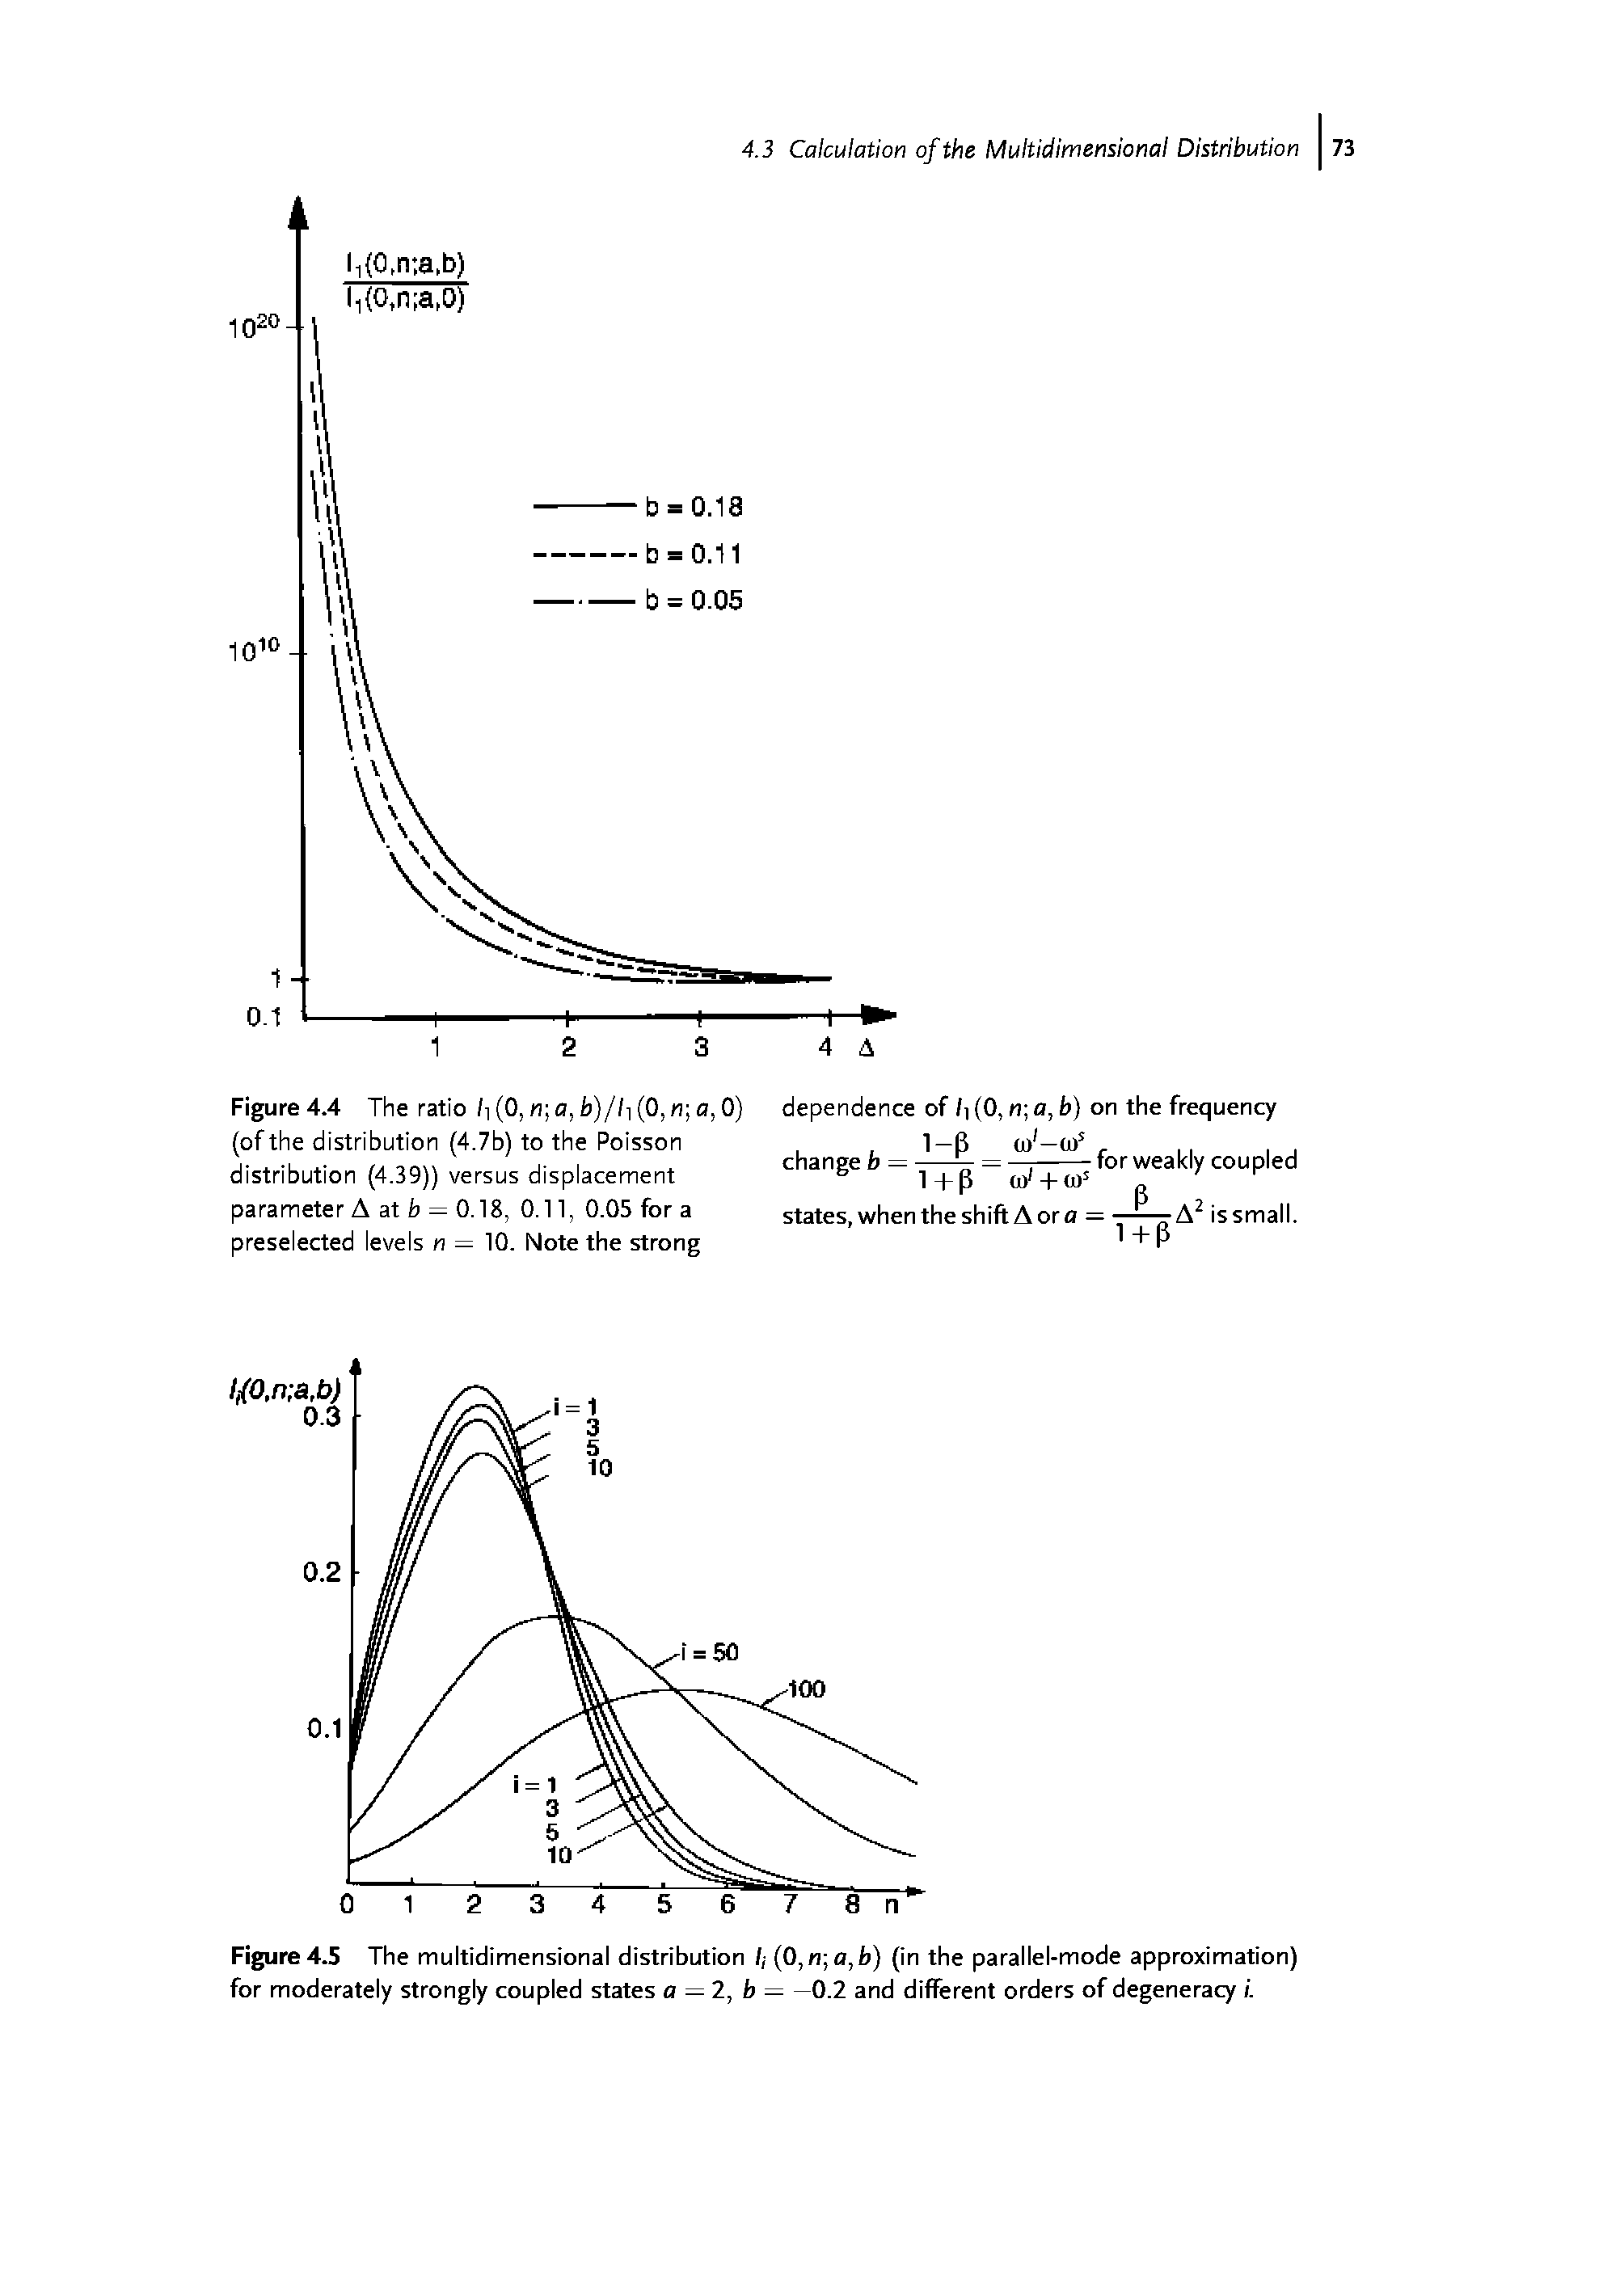 Figure4.5 The multidimensional distribution / (0,n a,b) (in the parallel-mode approximation) for moderately strongly coupled states a = 2, b = —0.2 and different orders of degeneracy i.